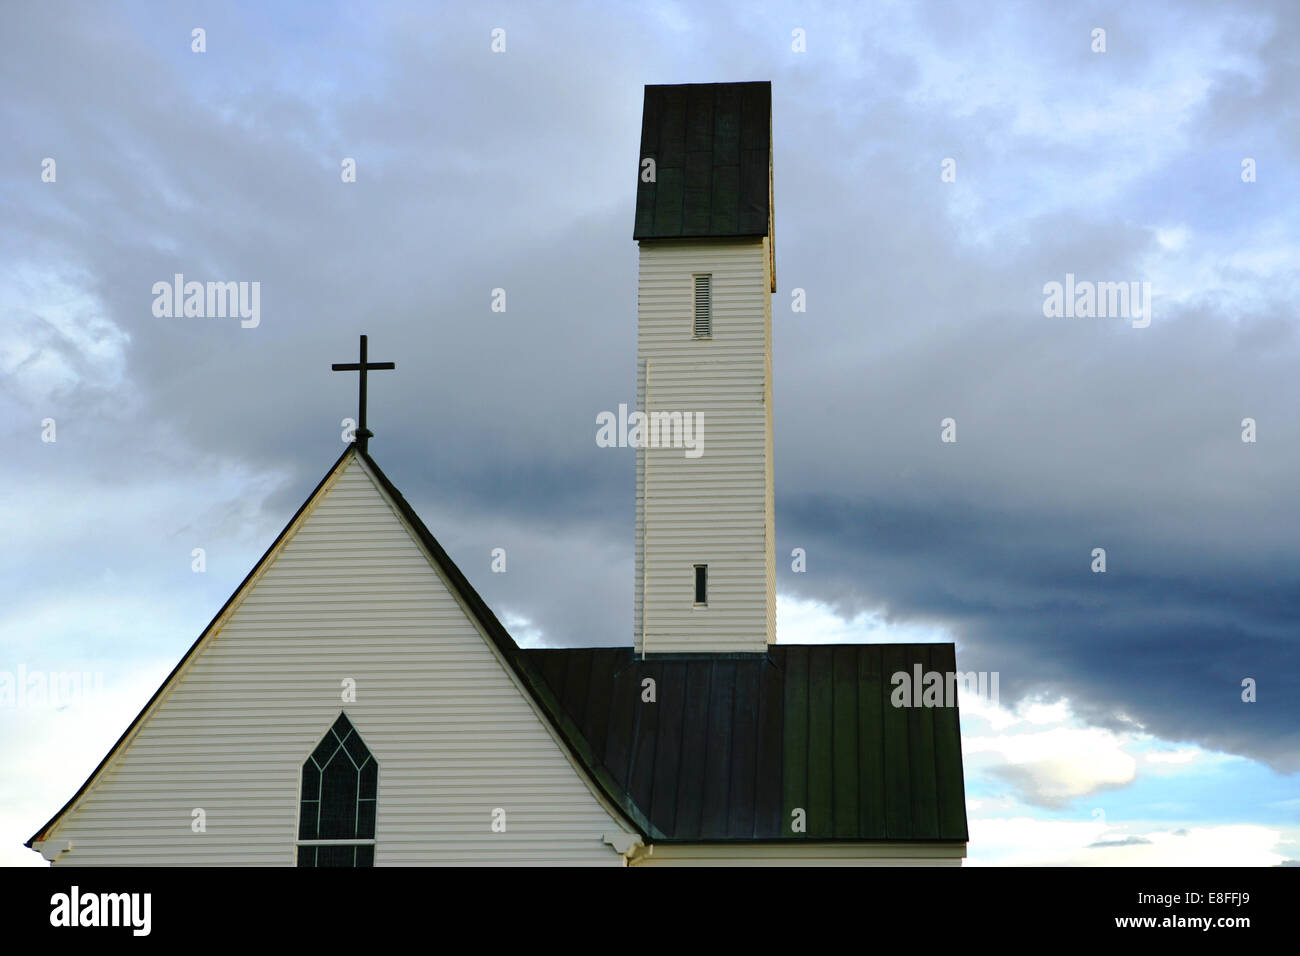 Iceland, Top section of church against moody sky Stock Photo